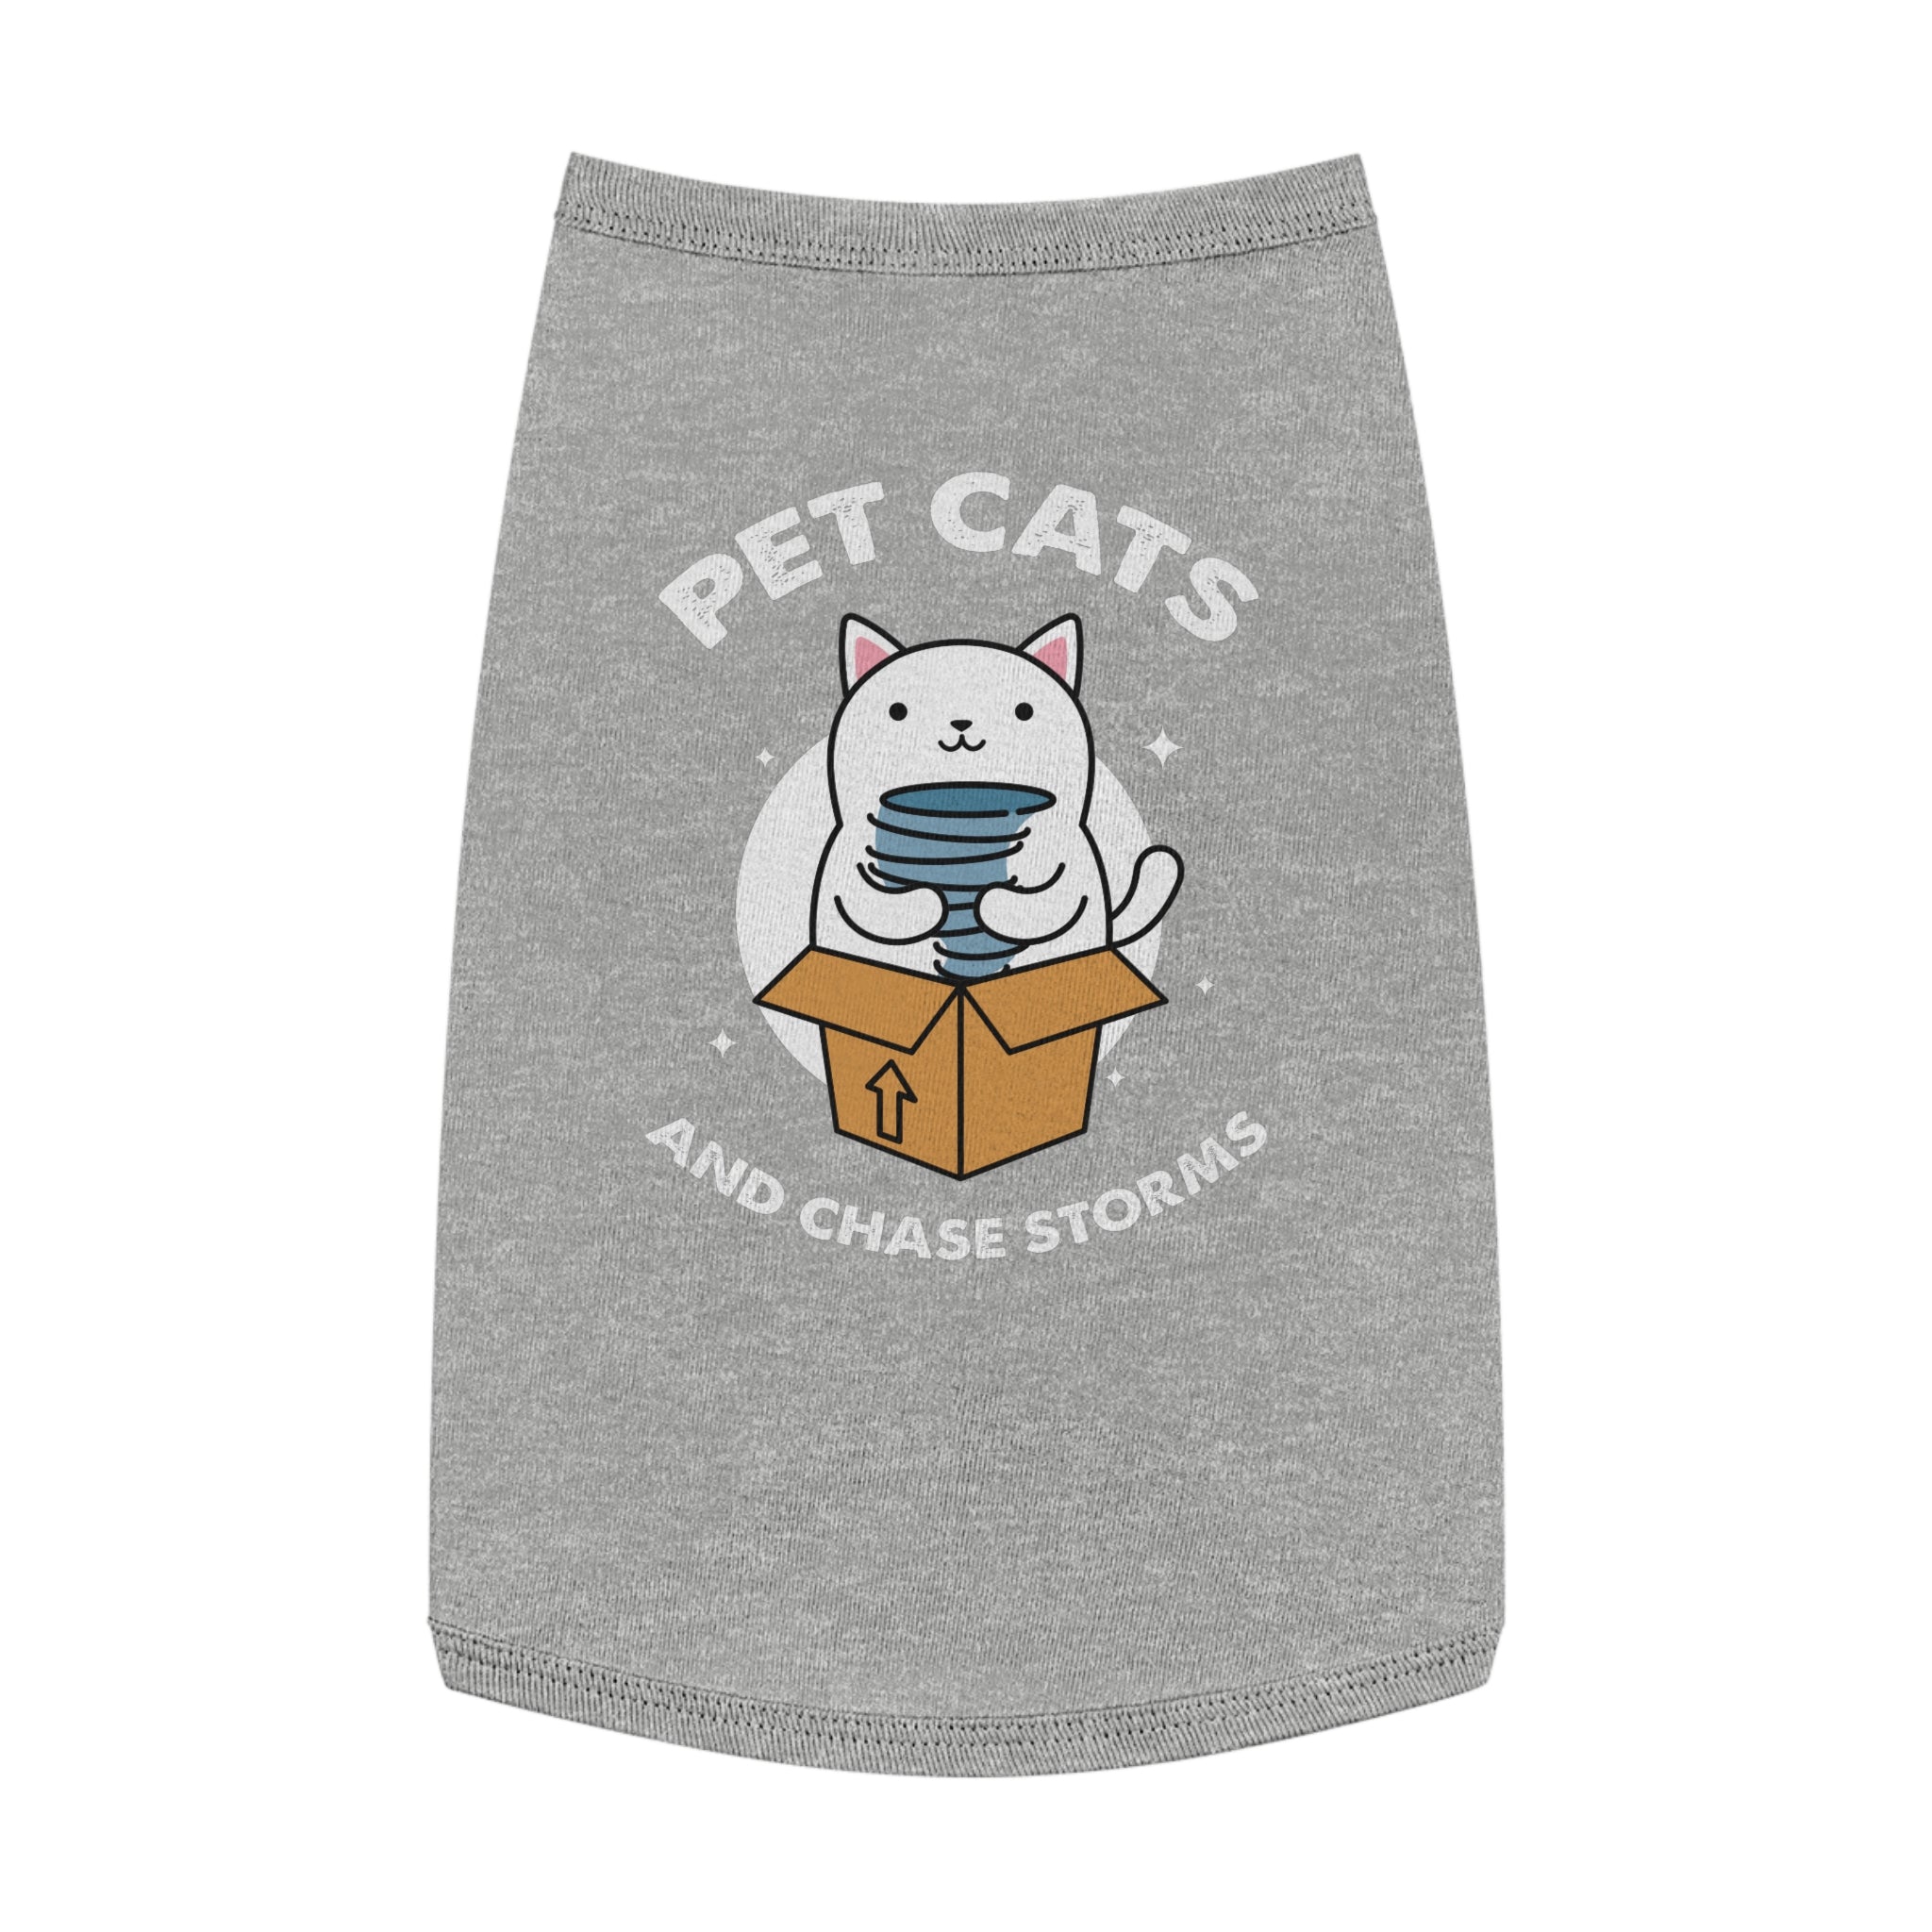 Pet Cats and Chase Storms Pet Shirt 